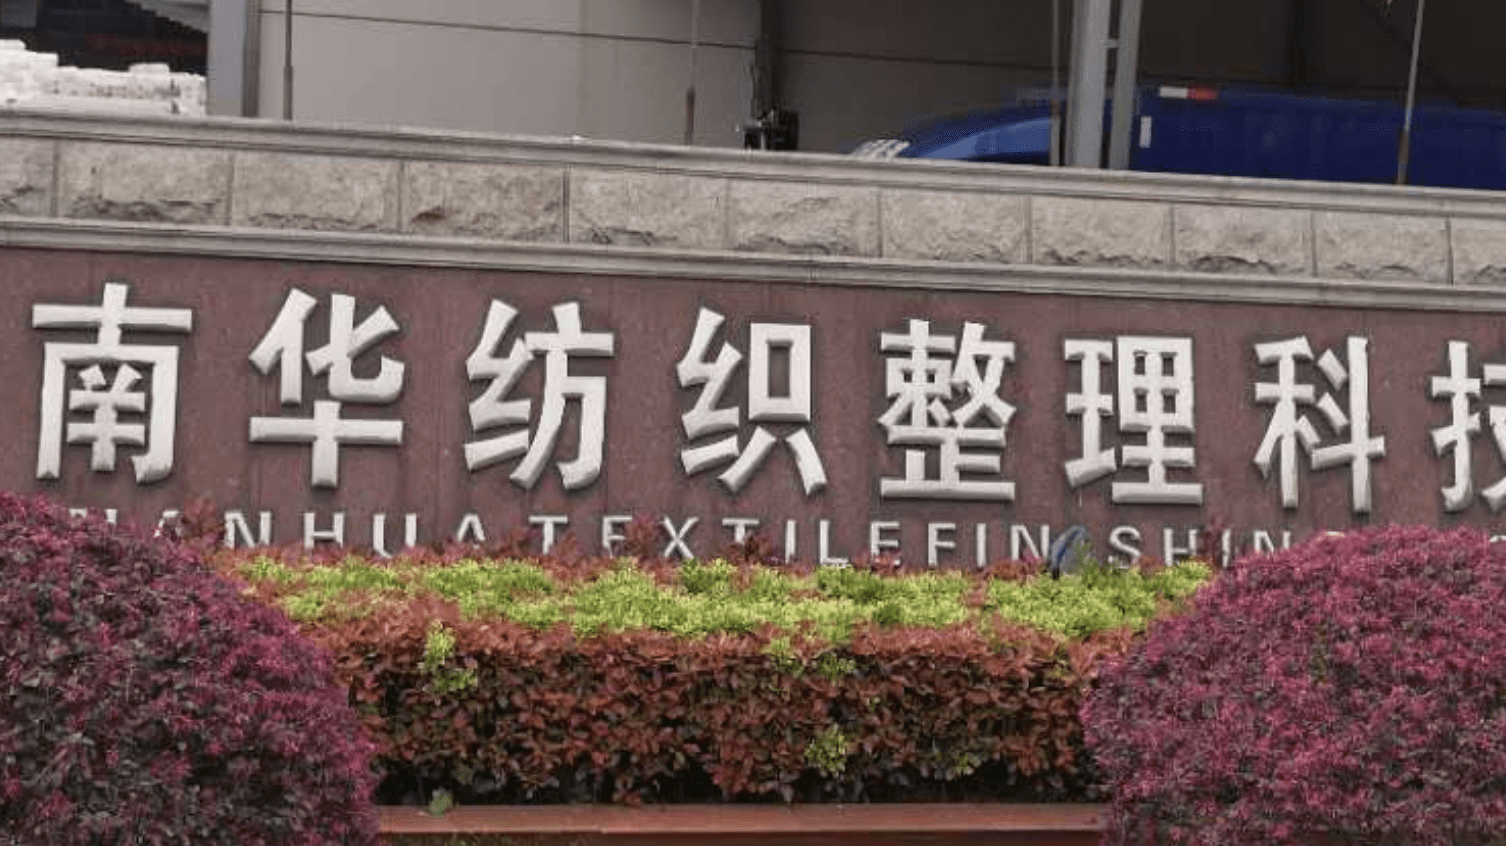 Building sign in Chinese